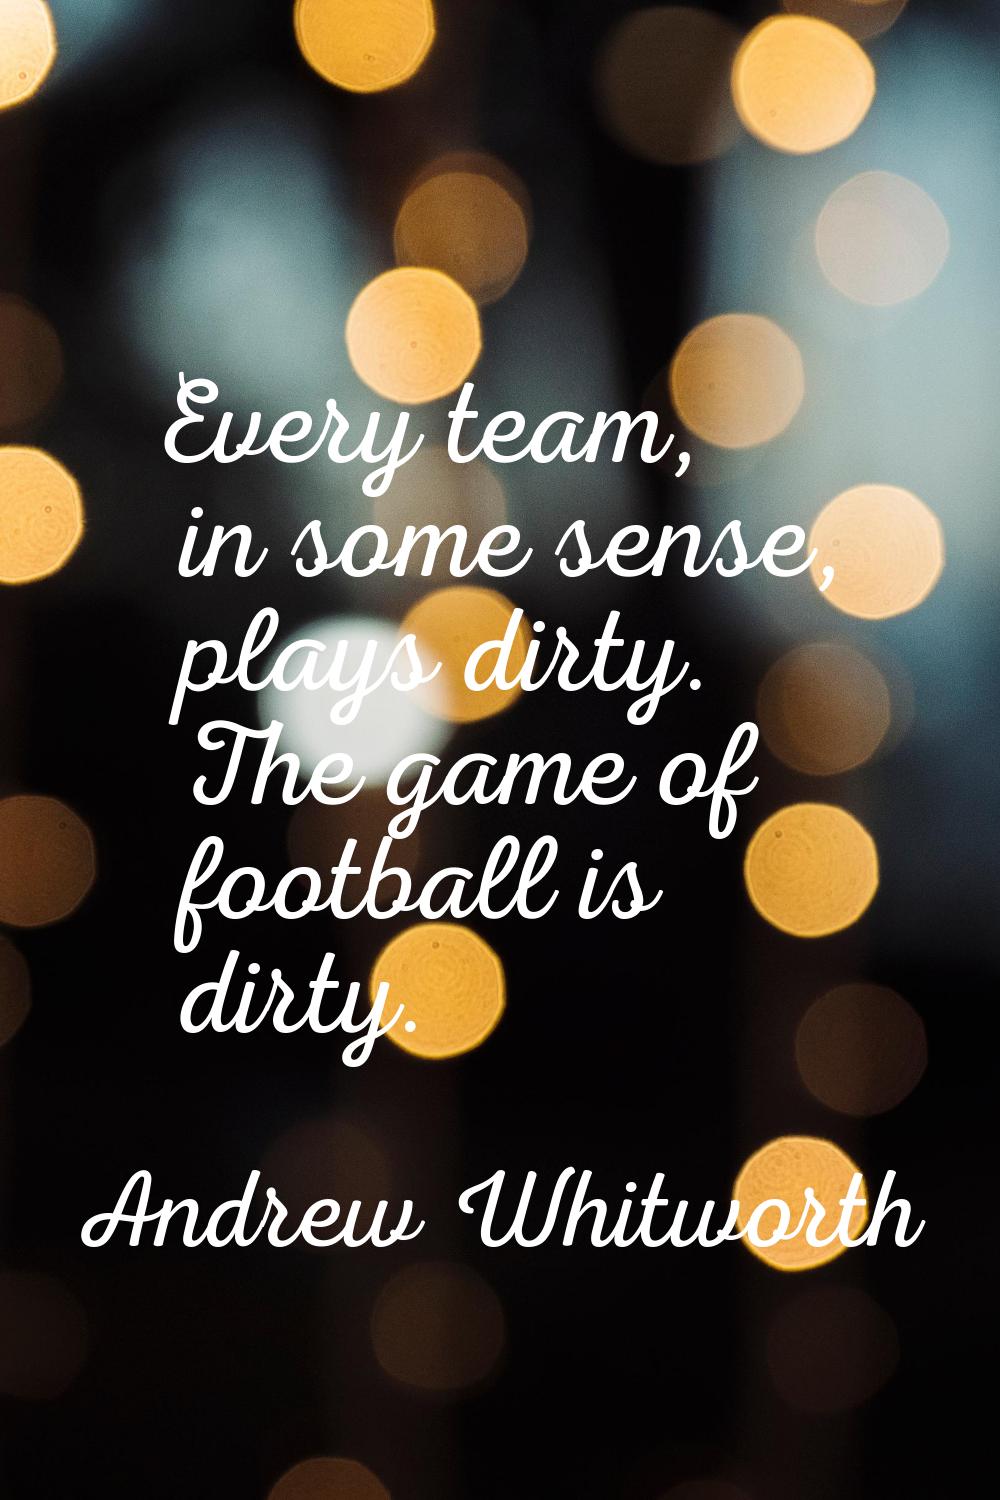 Every team, in some sense, plays dirty. The game of football is dirty.